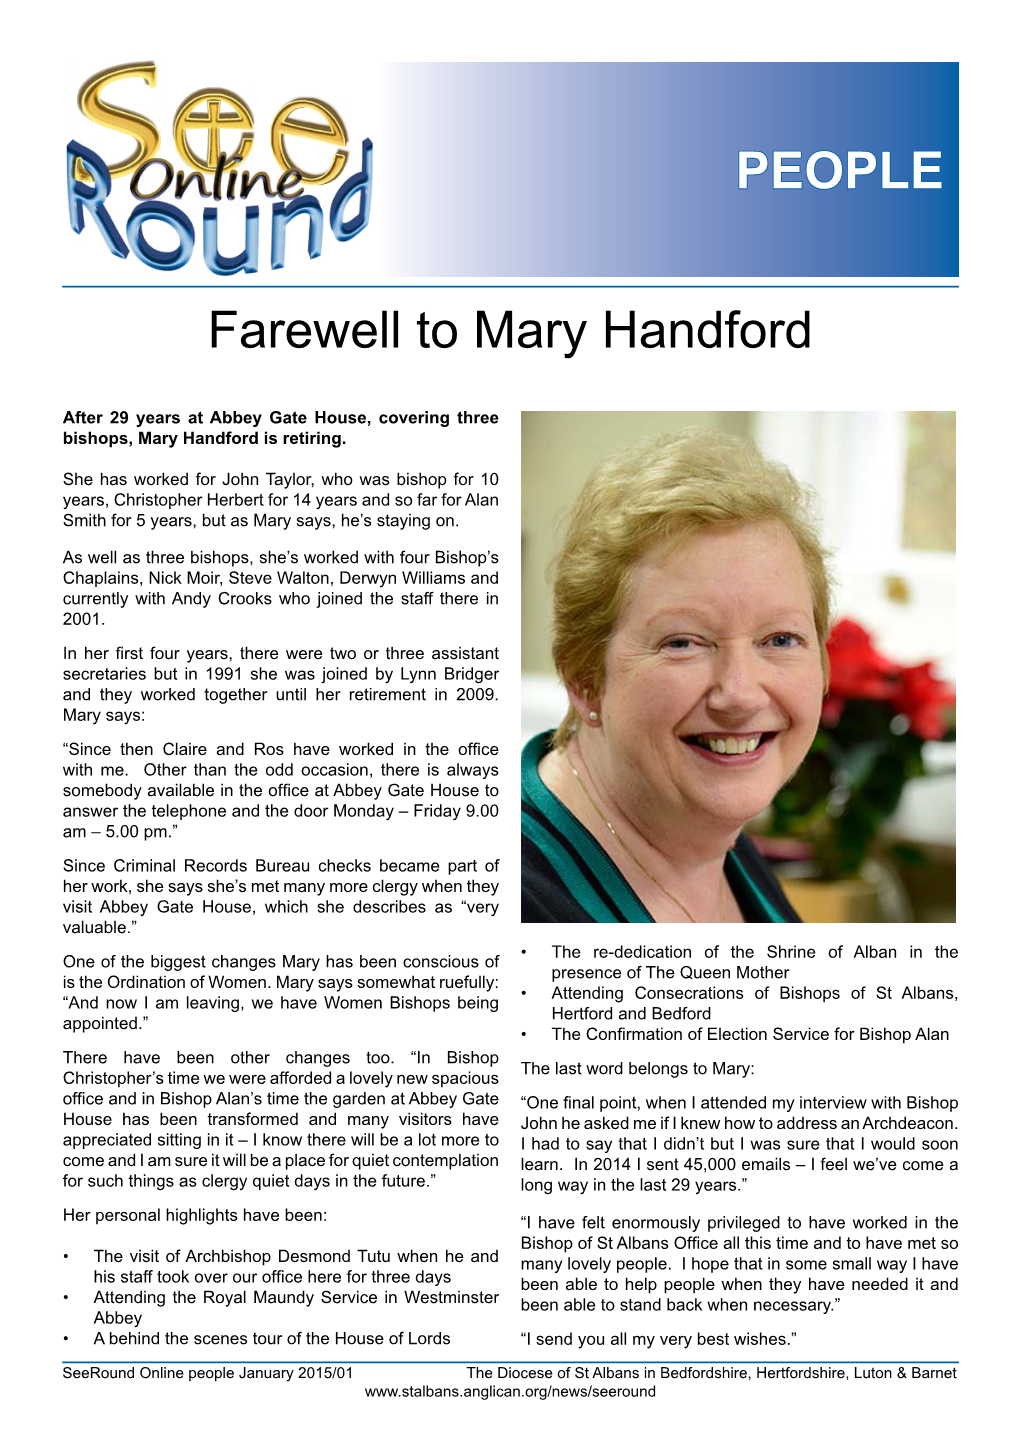 Farewell to Mary Handford PEOPLE